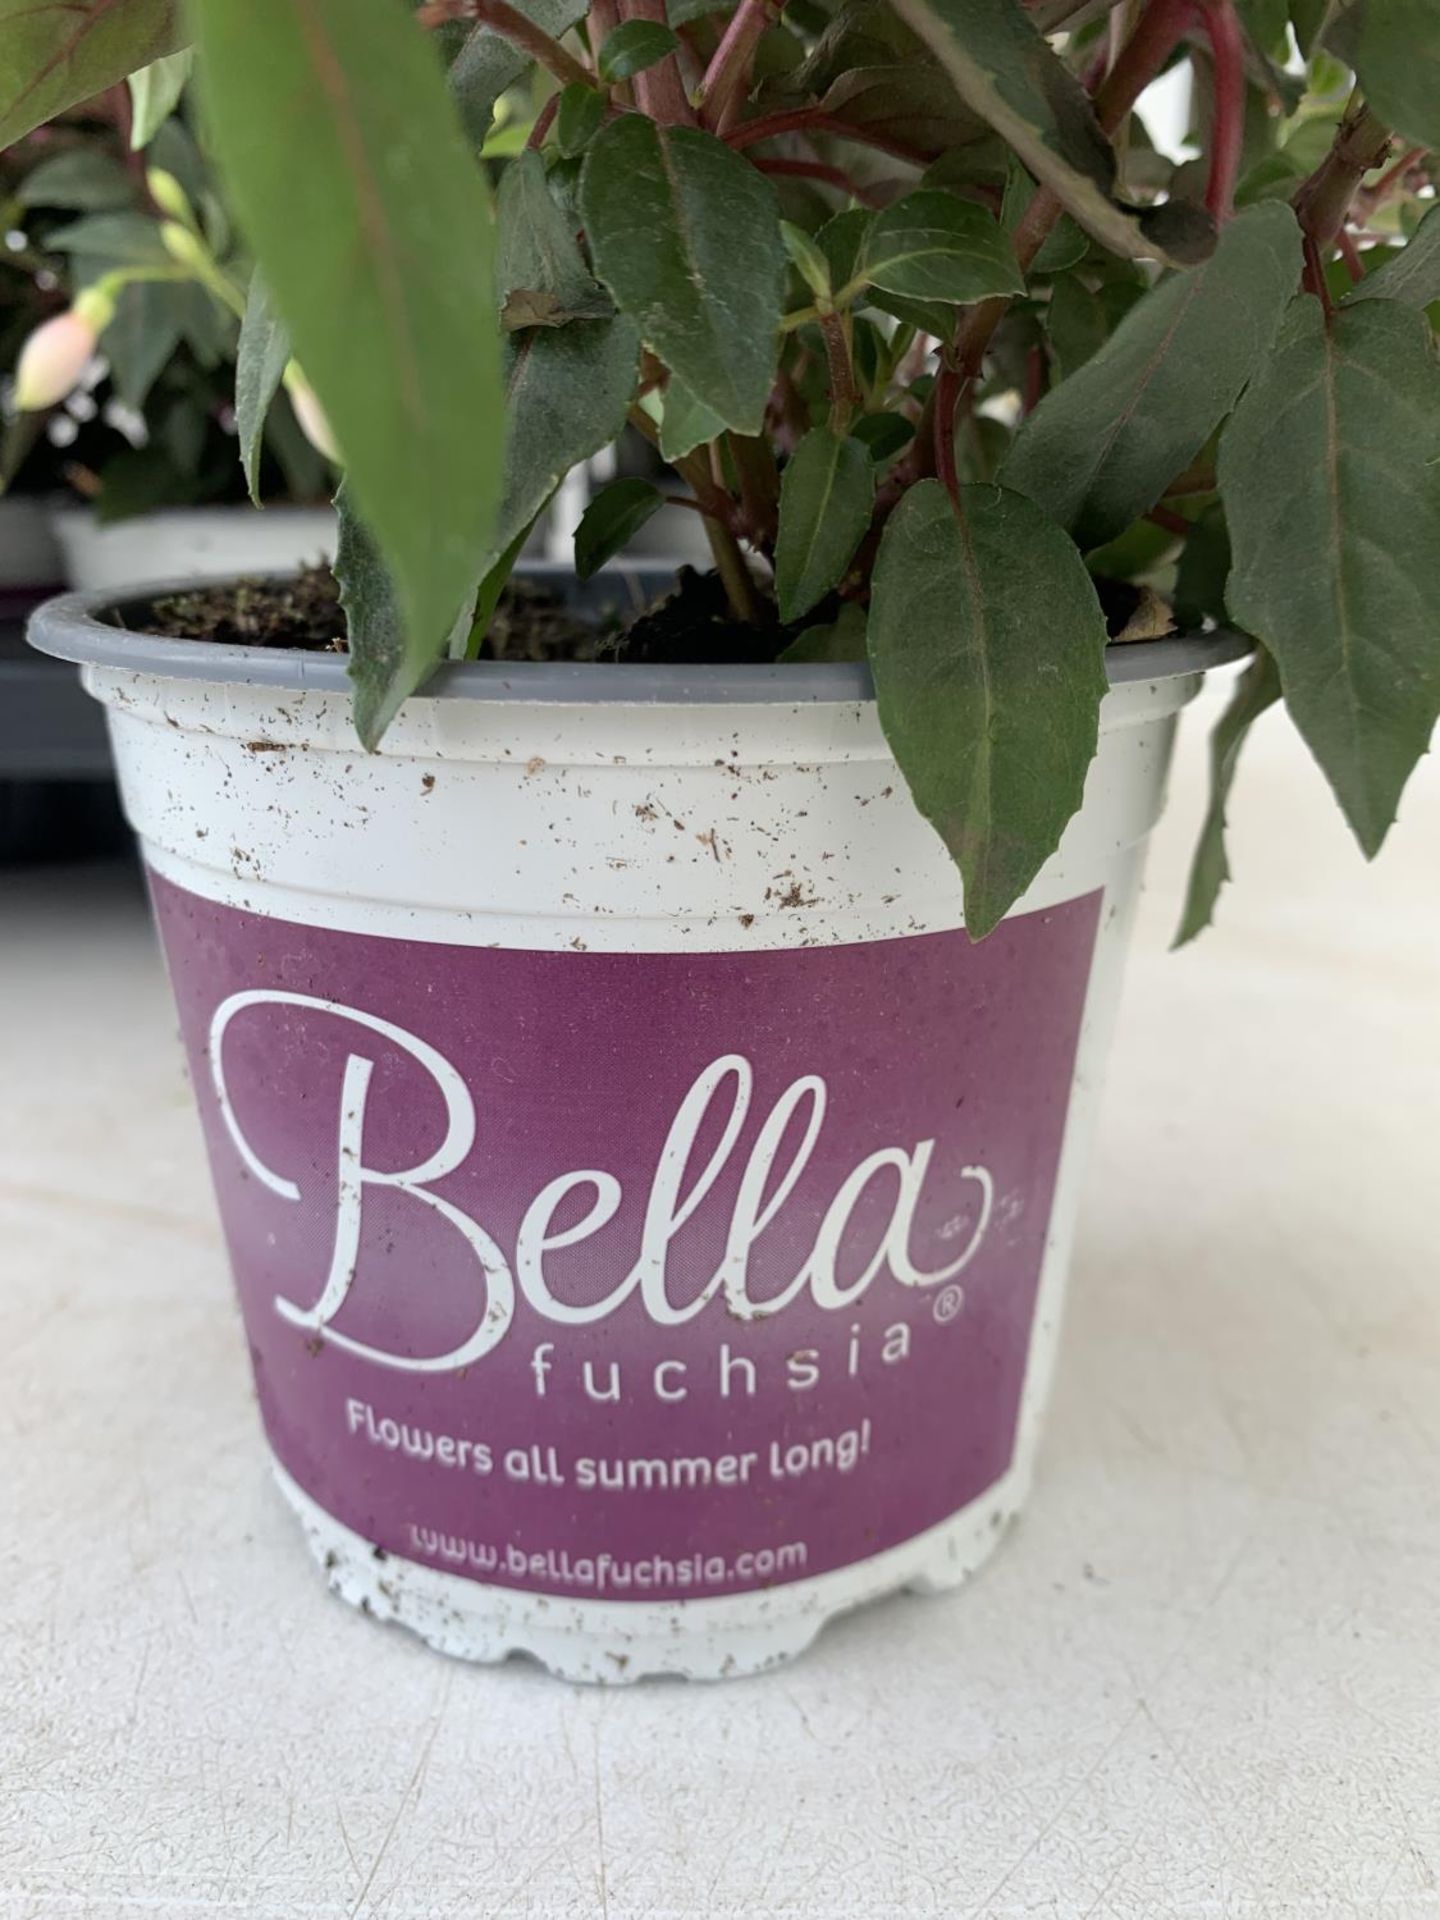 NINE FUCHSIA BELLA PINK IN 20CM POTS 20-30CM TALL TO BE SOLD FOR THE NINE PLUS VAT - Image 5 of 6